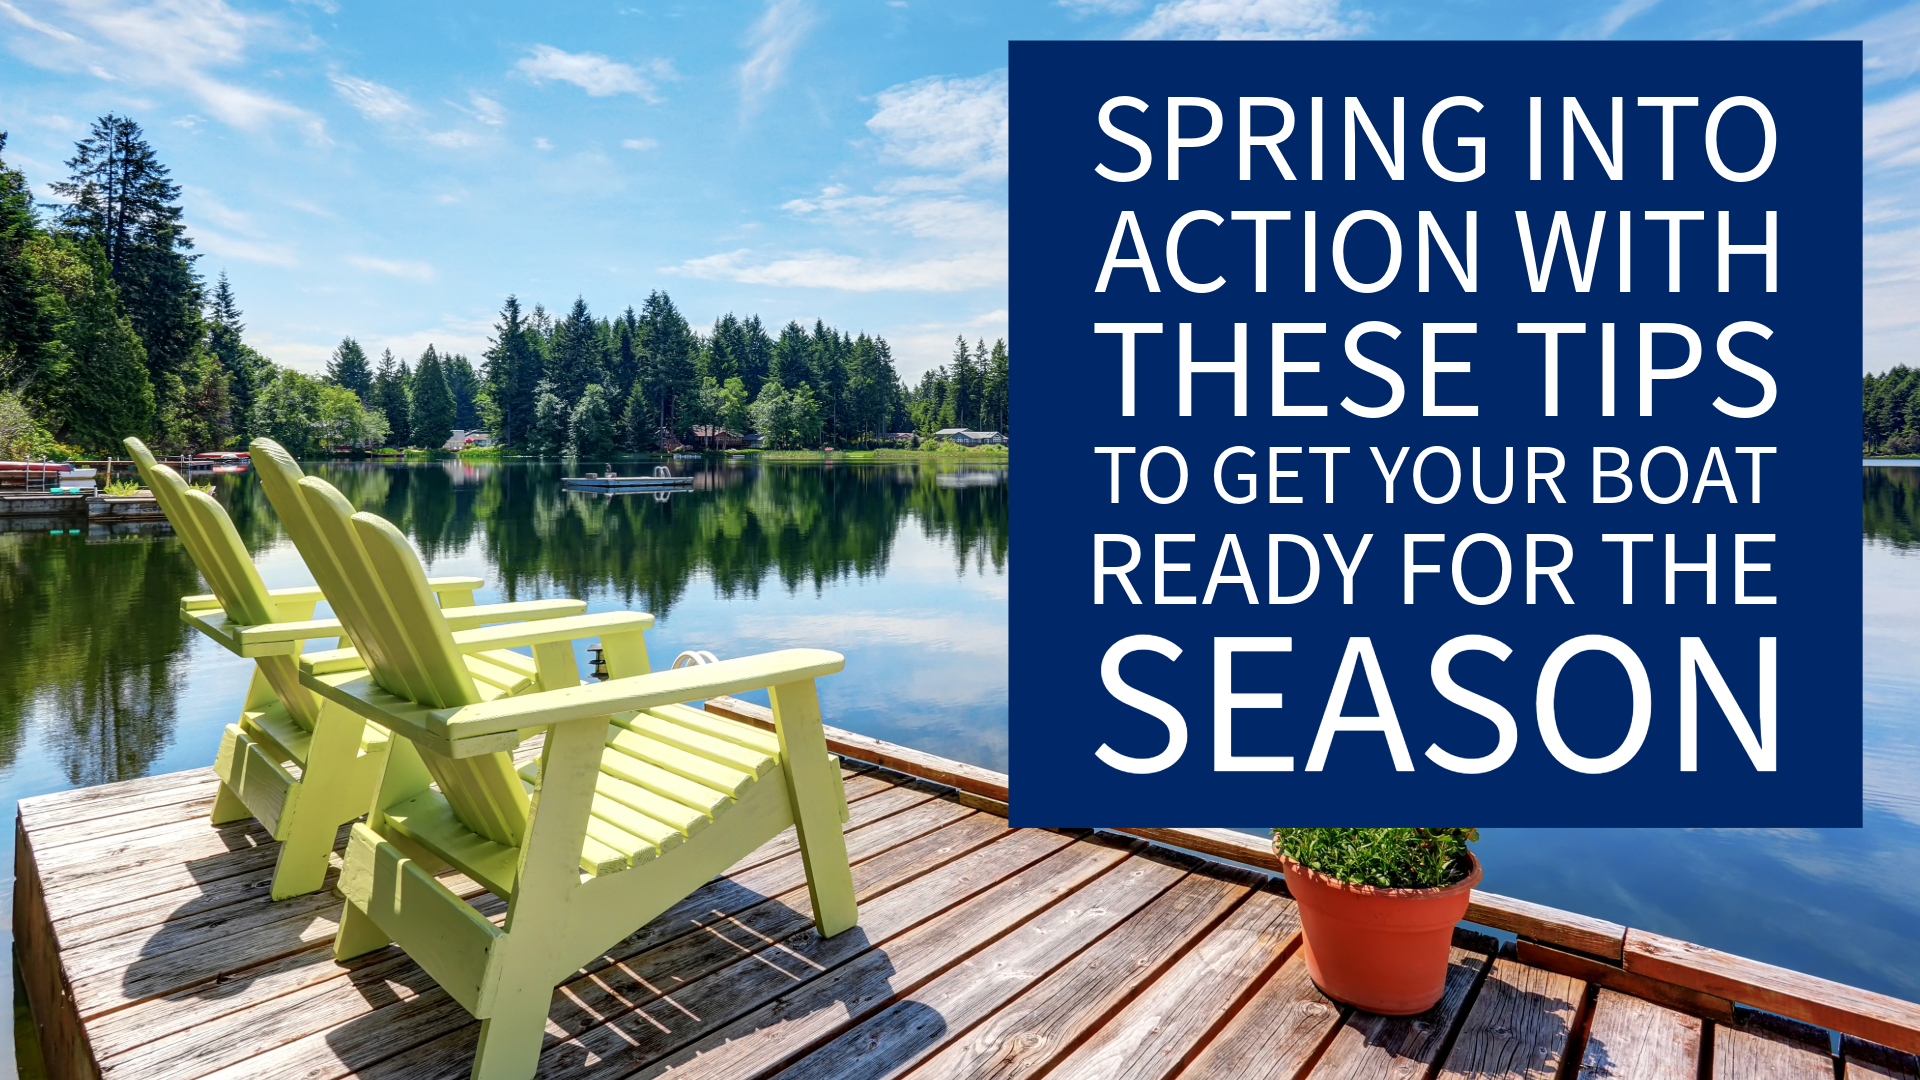 Spring into action to get your boat ready for the season